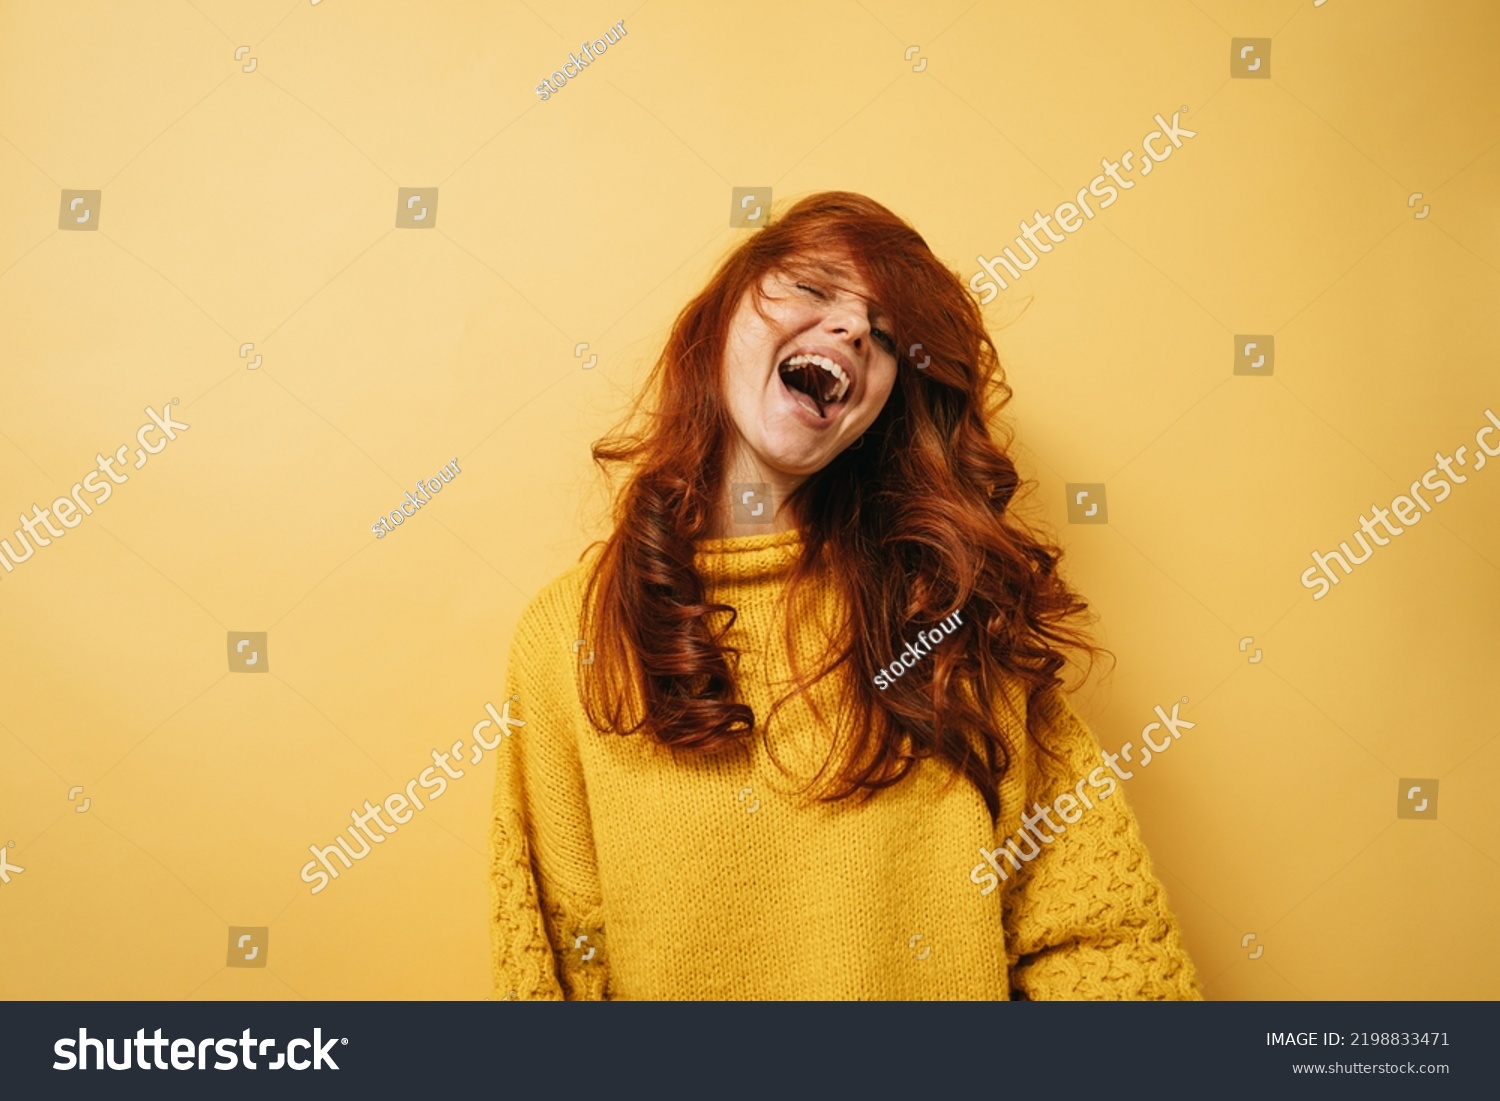 Laughing redhead woman with yellow sweater is happy copyspace against yellow background #2198833471